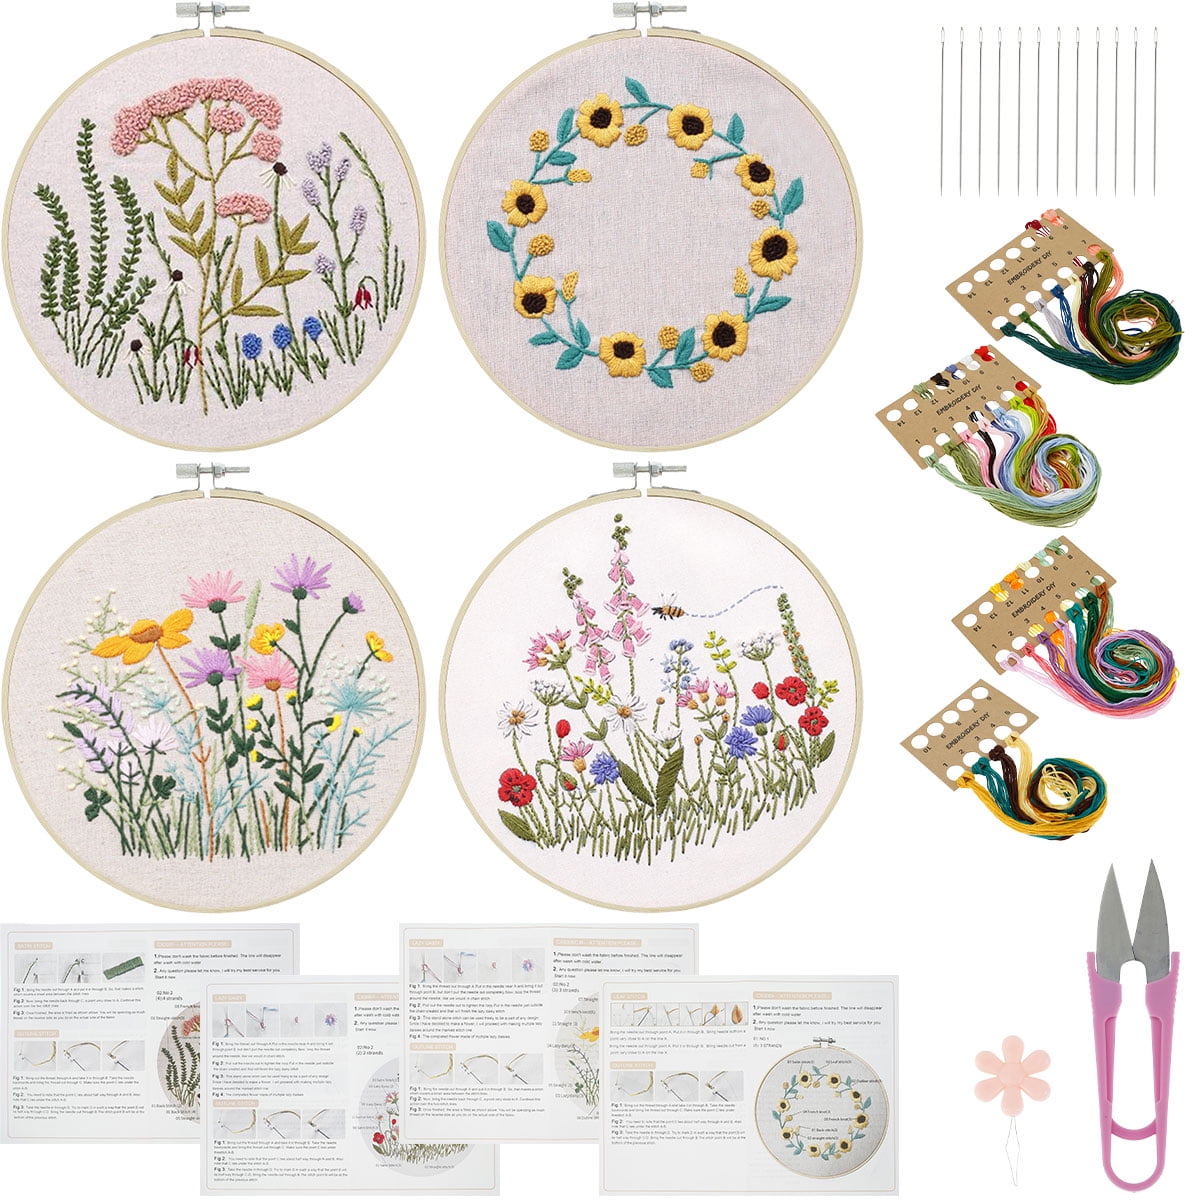 Eummy Embroidery Starter Kit Hand-made Cross Stitch Kit with Pattern ...